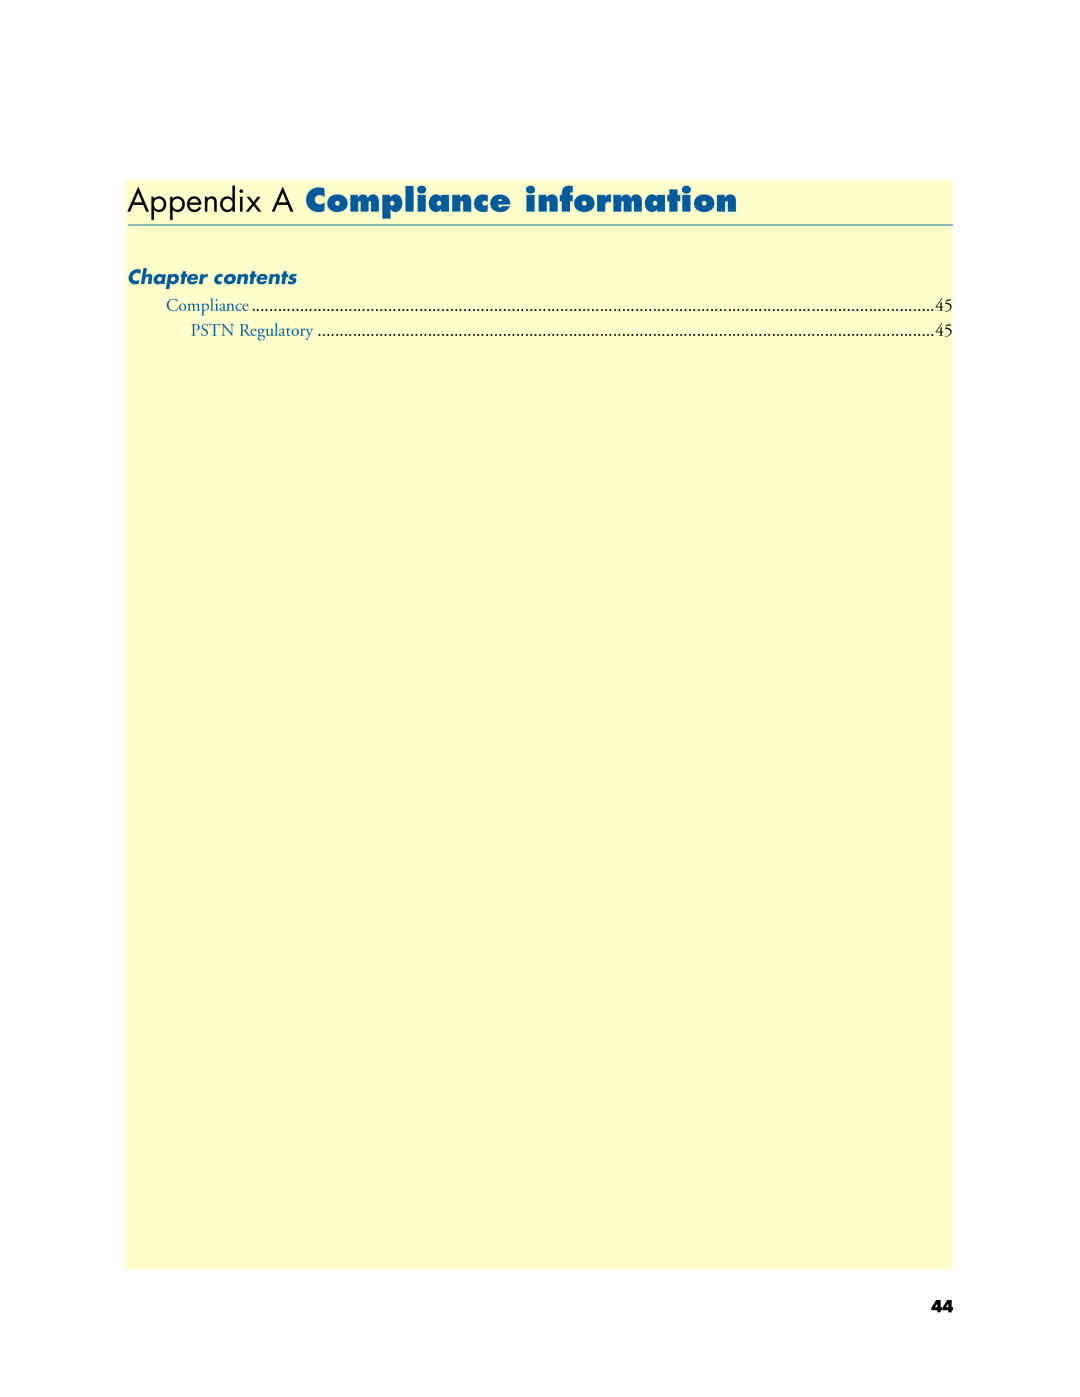 Patton electronic 4950-NCE manual Appendix A Compliance information, Chapter contents 